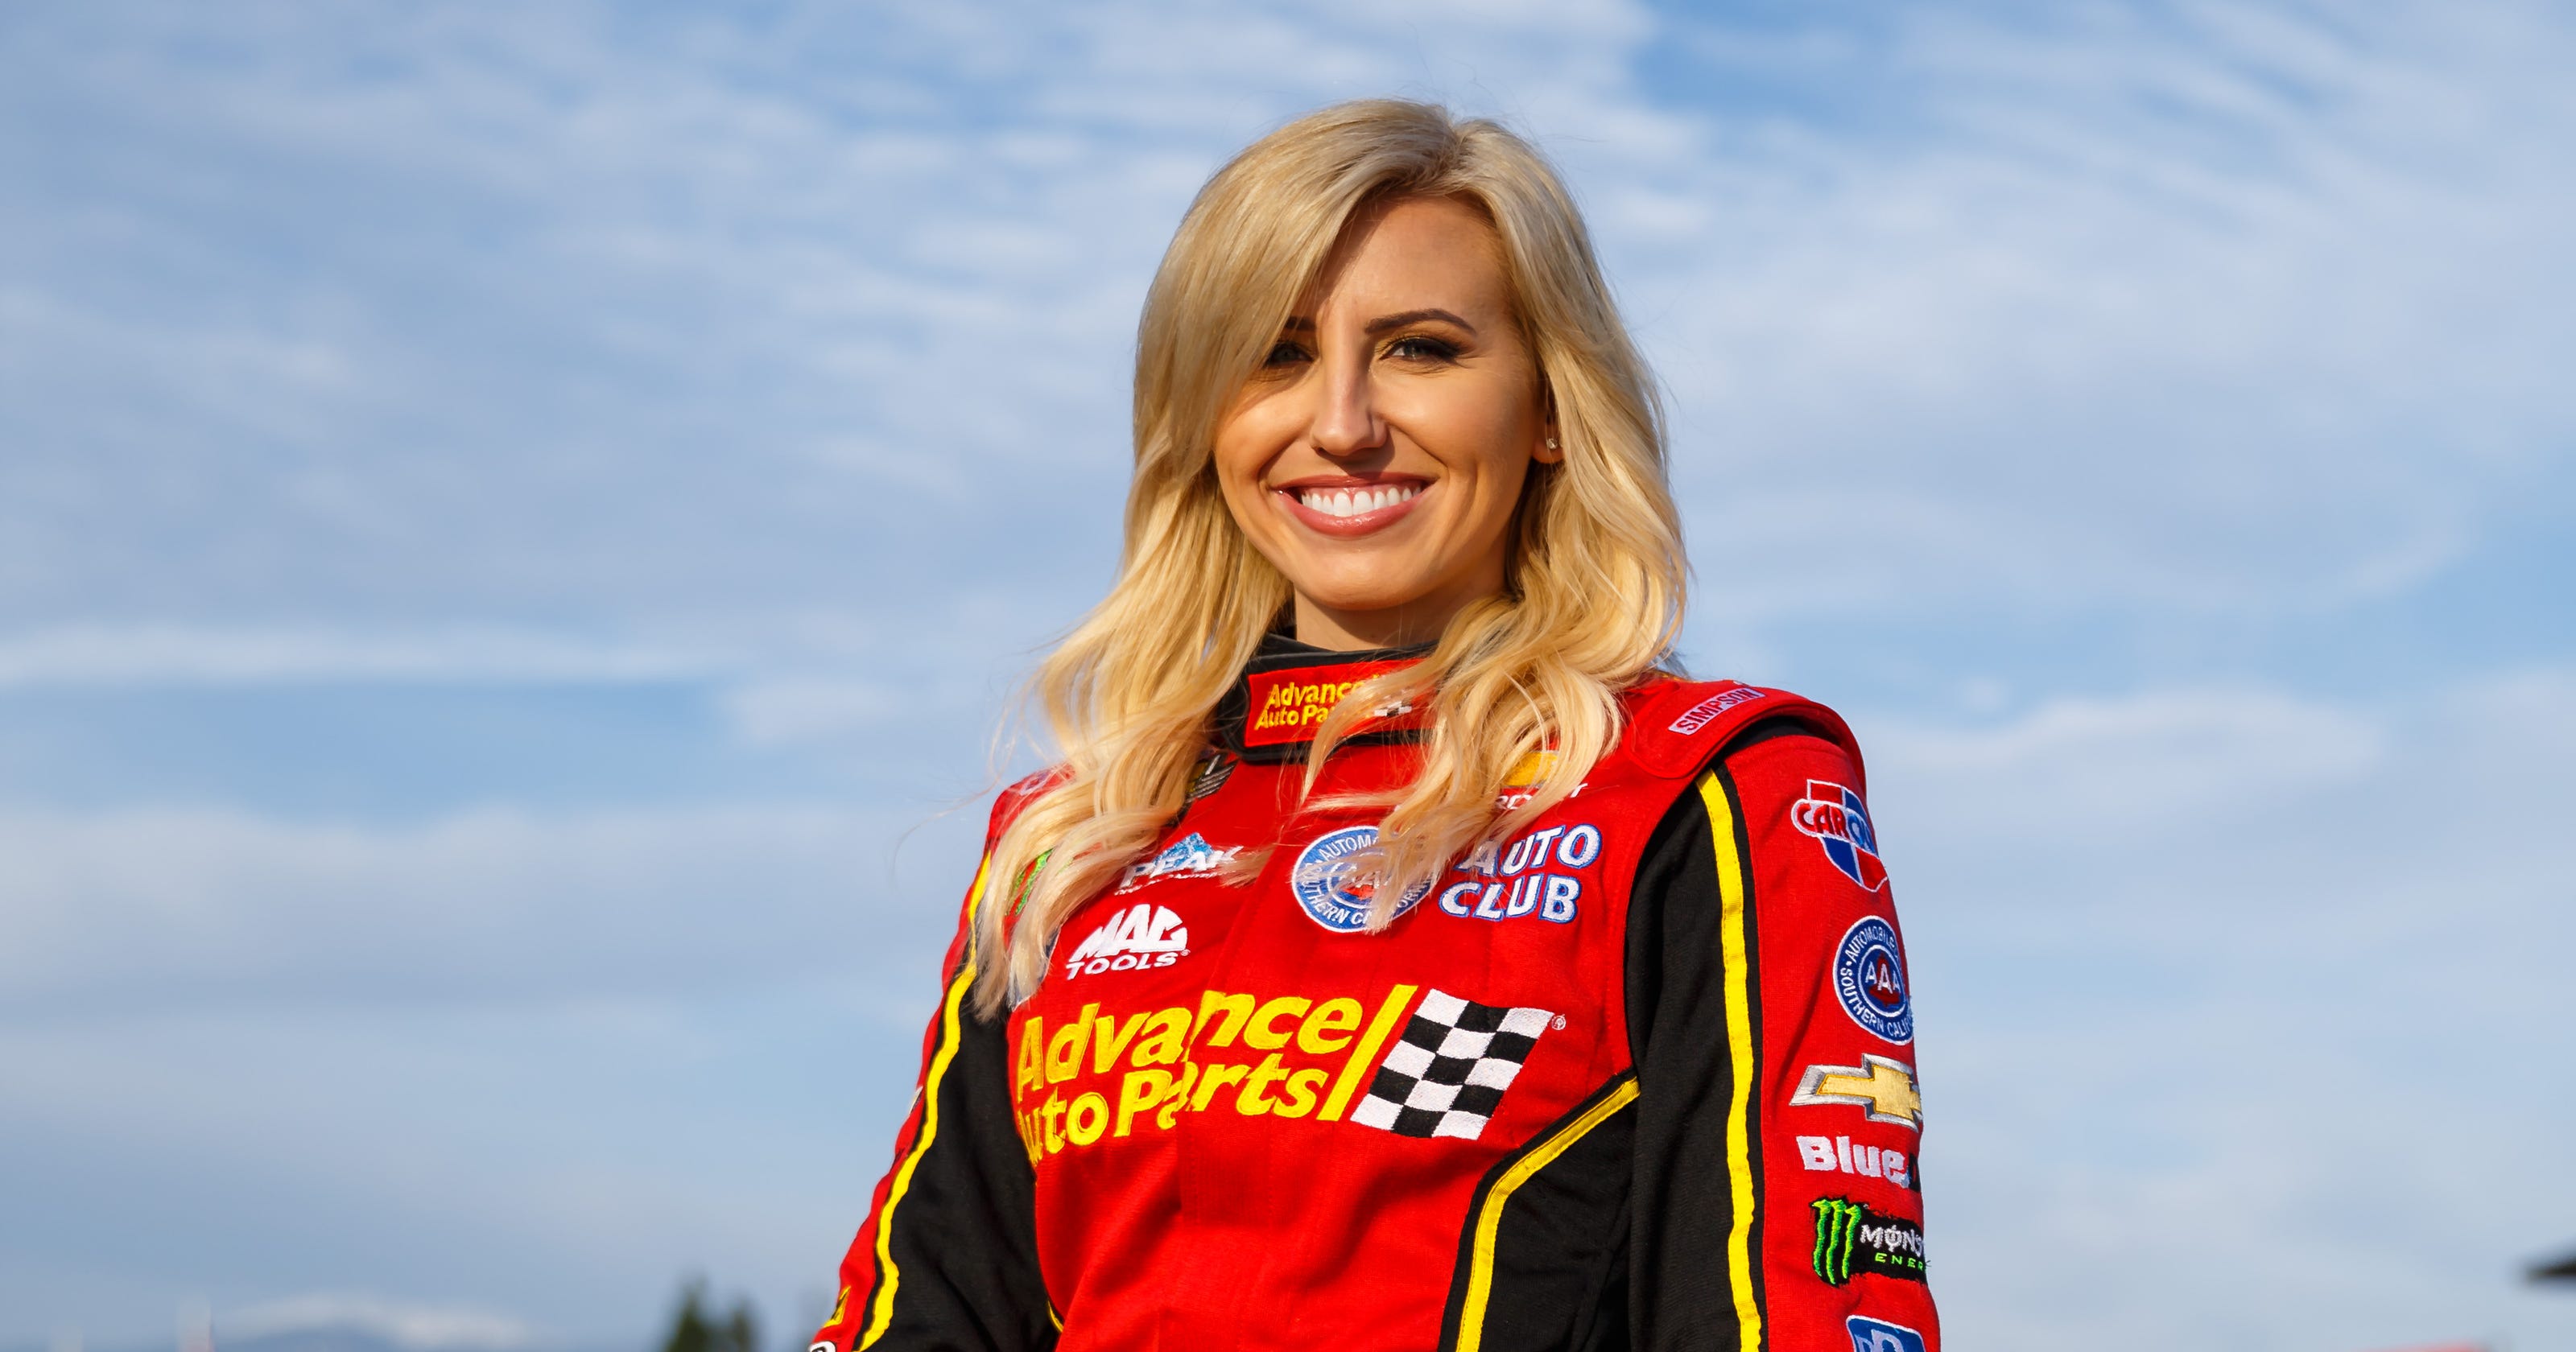 Courtney Force will test Taylor Swift's 'reputation' in NHRA finale3200 x 1680